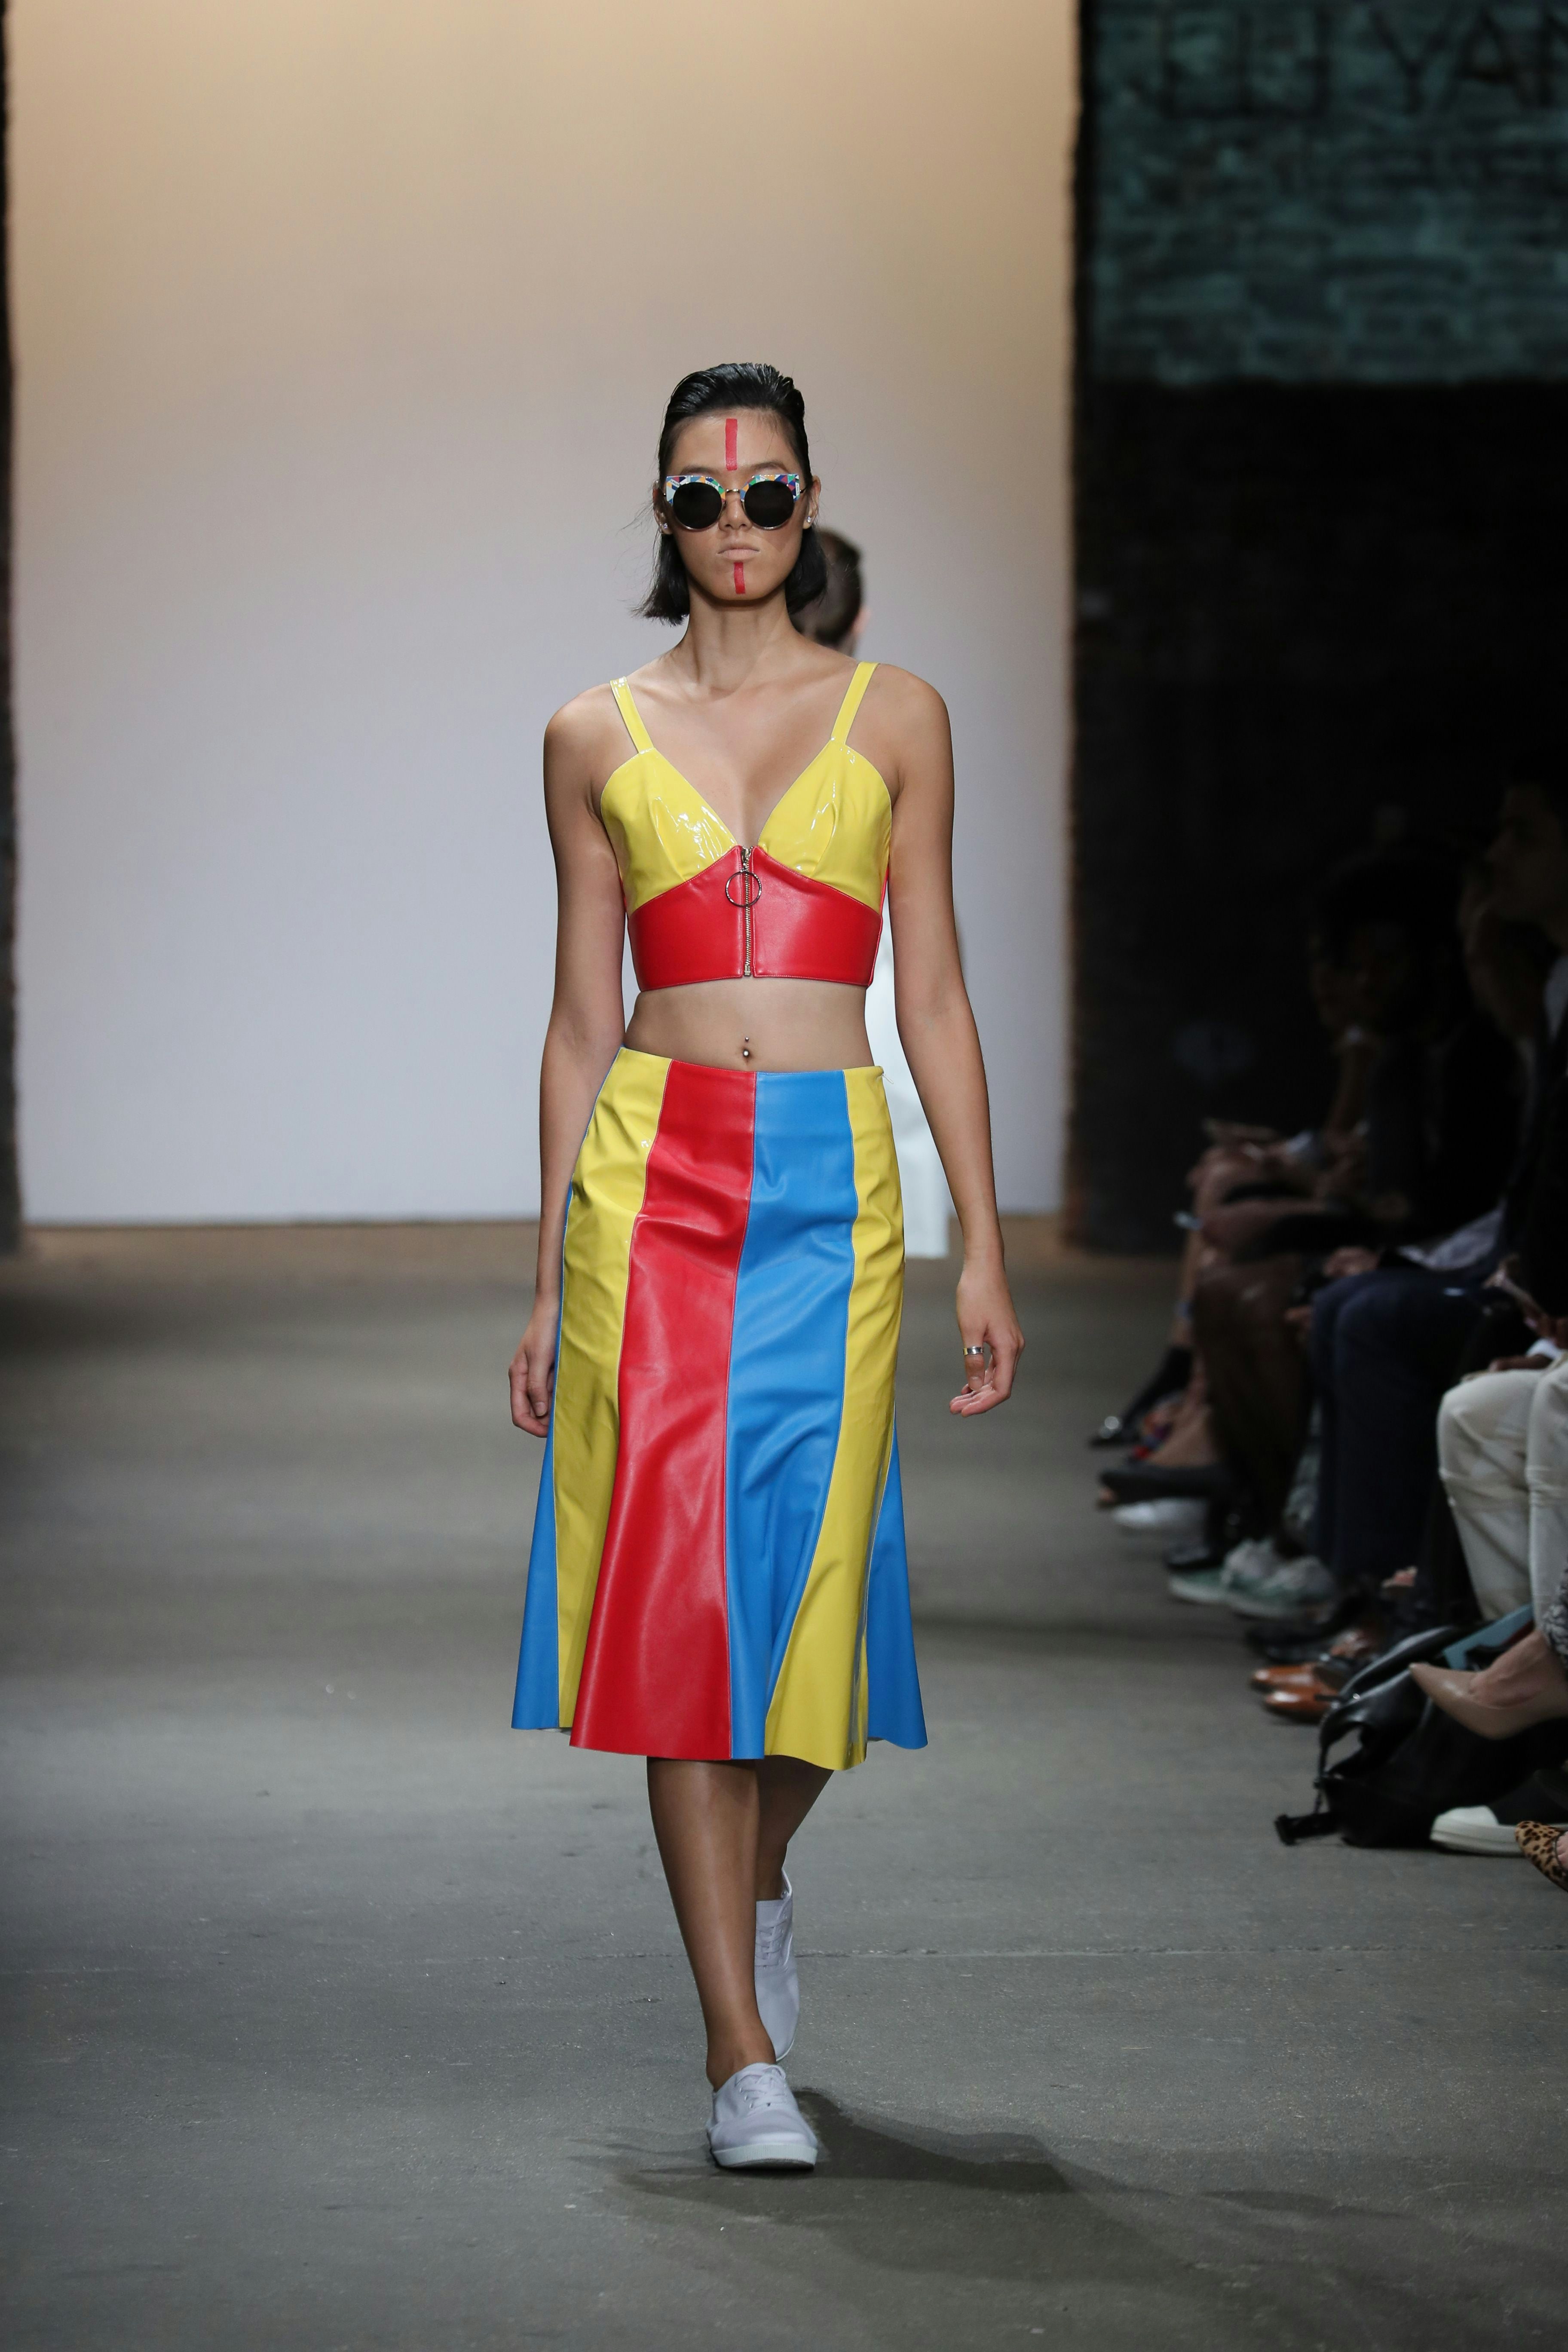 New York Fashion Week Grows as Magnet for Chinese Designers